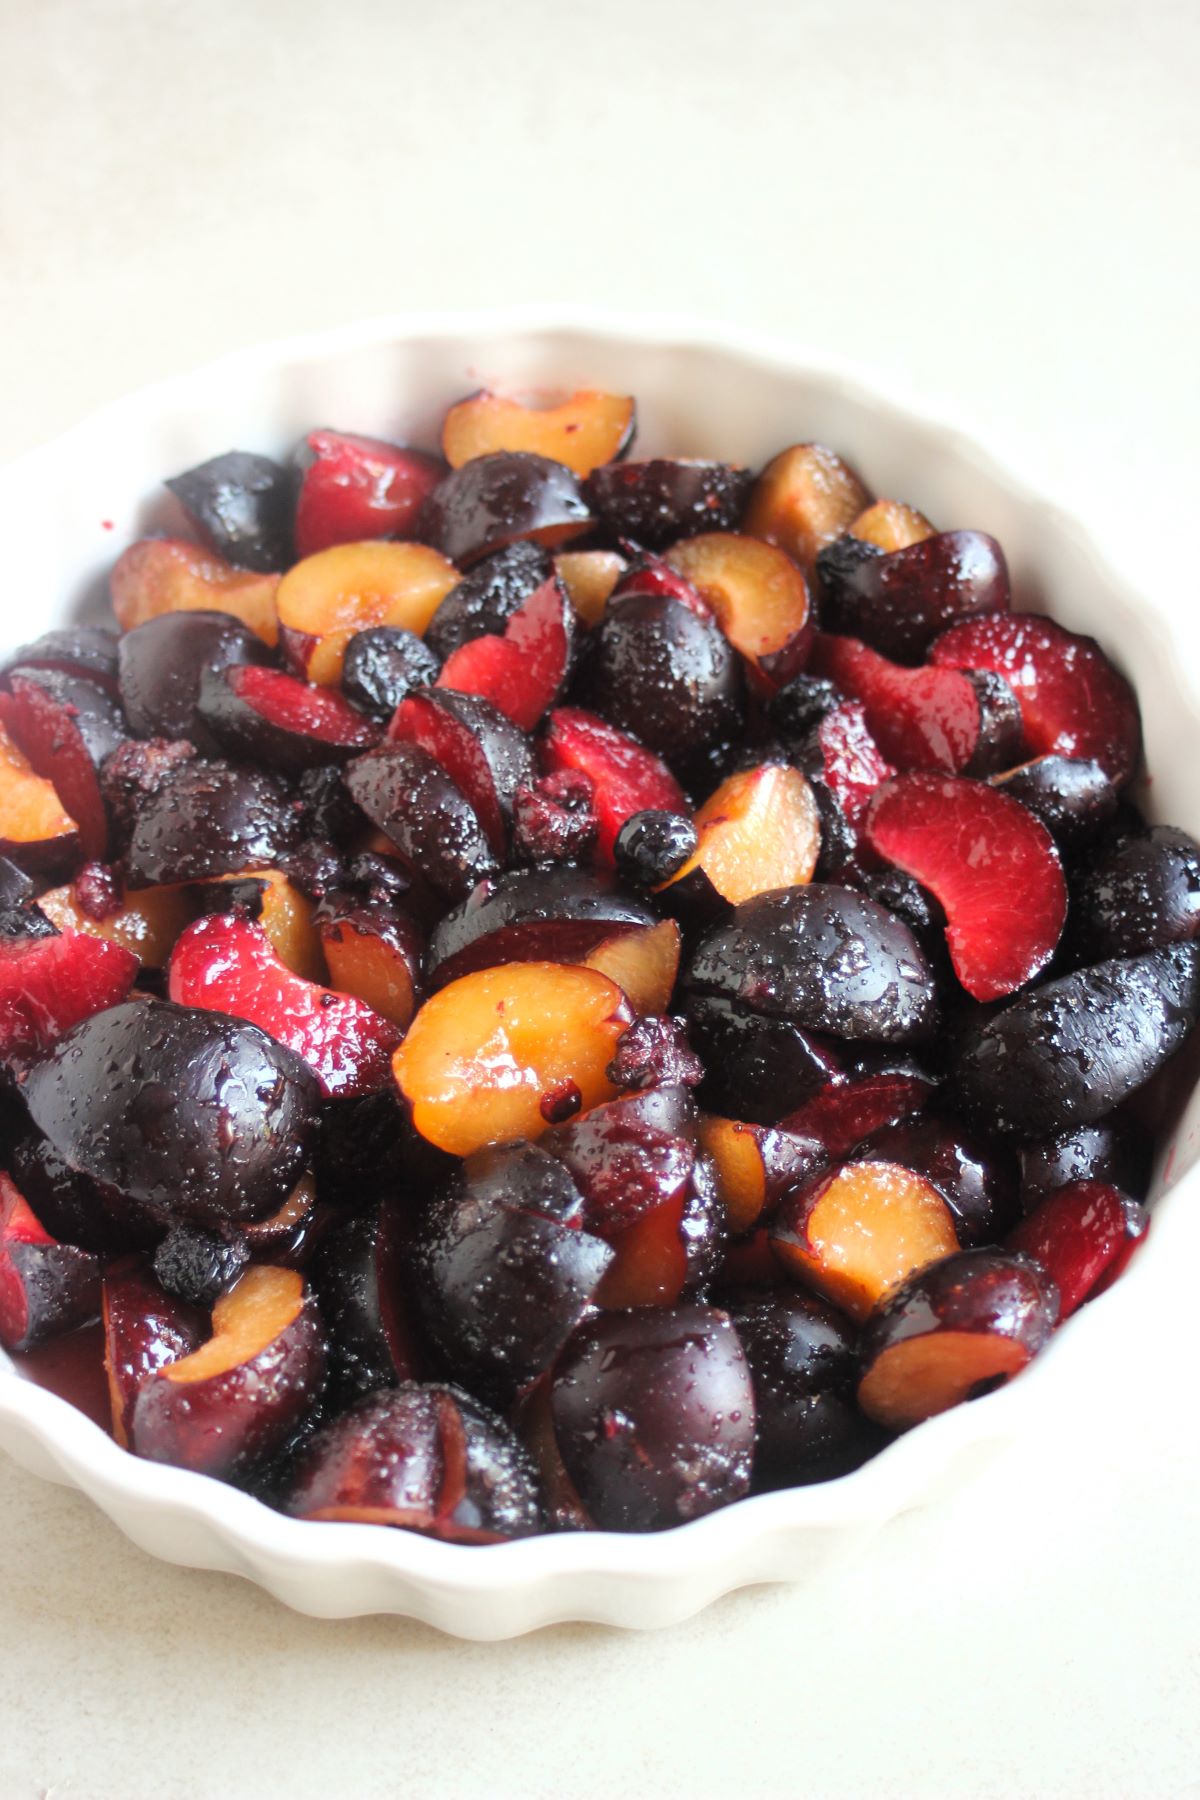 Round baking pan with slices of plums, and mixed berries.